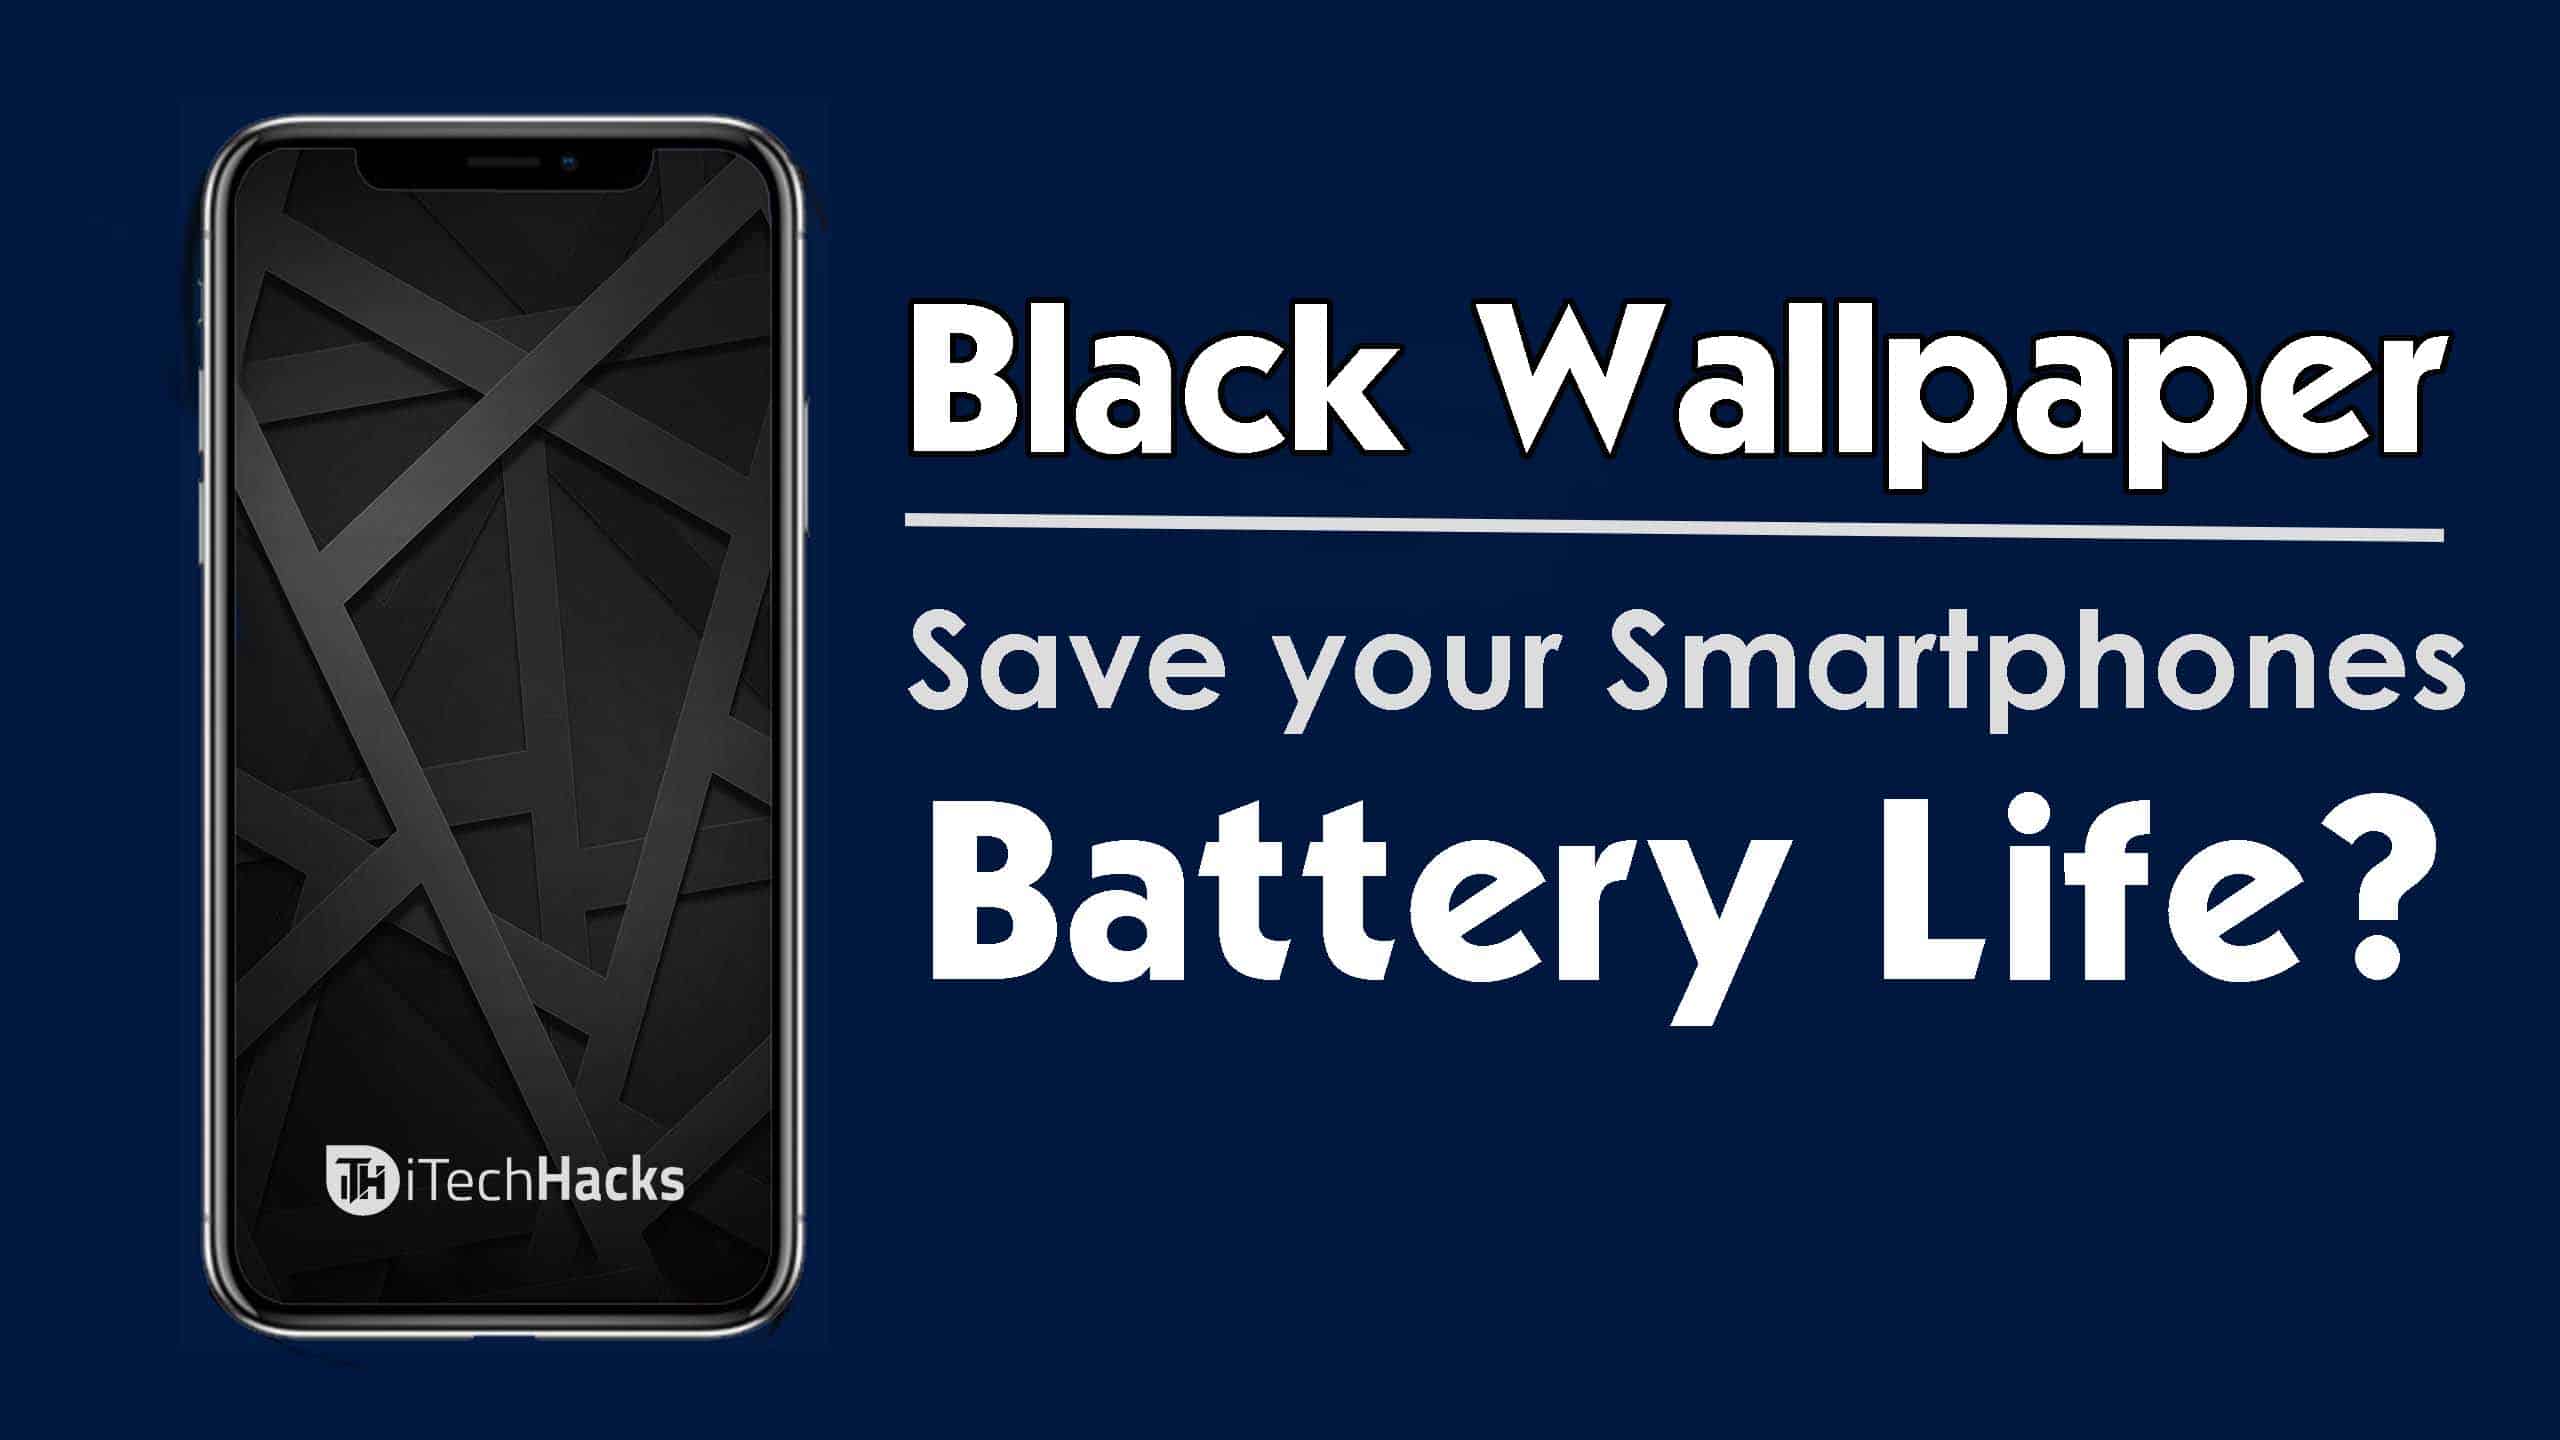 How Black Wallpaper Can Save your Android Battery?